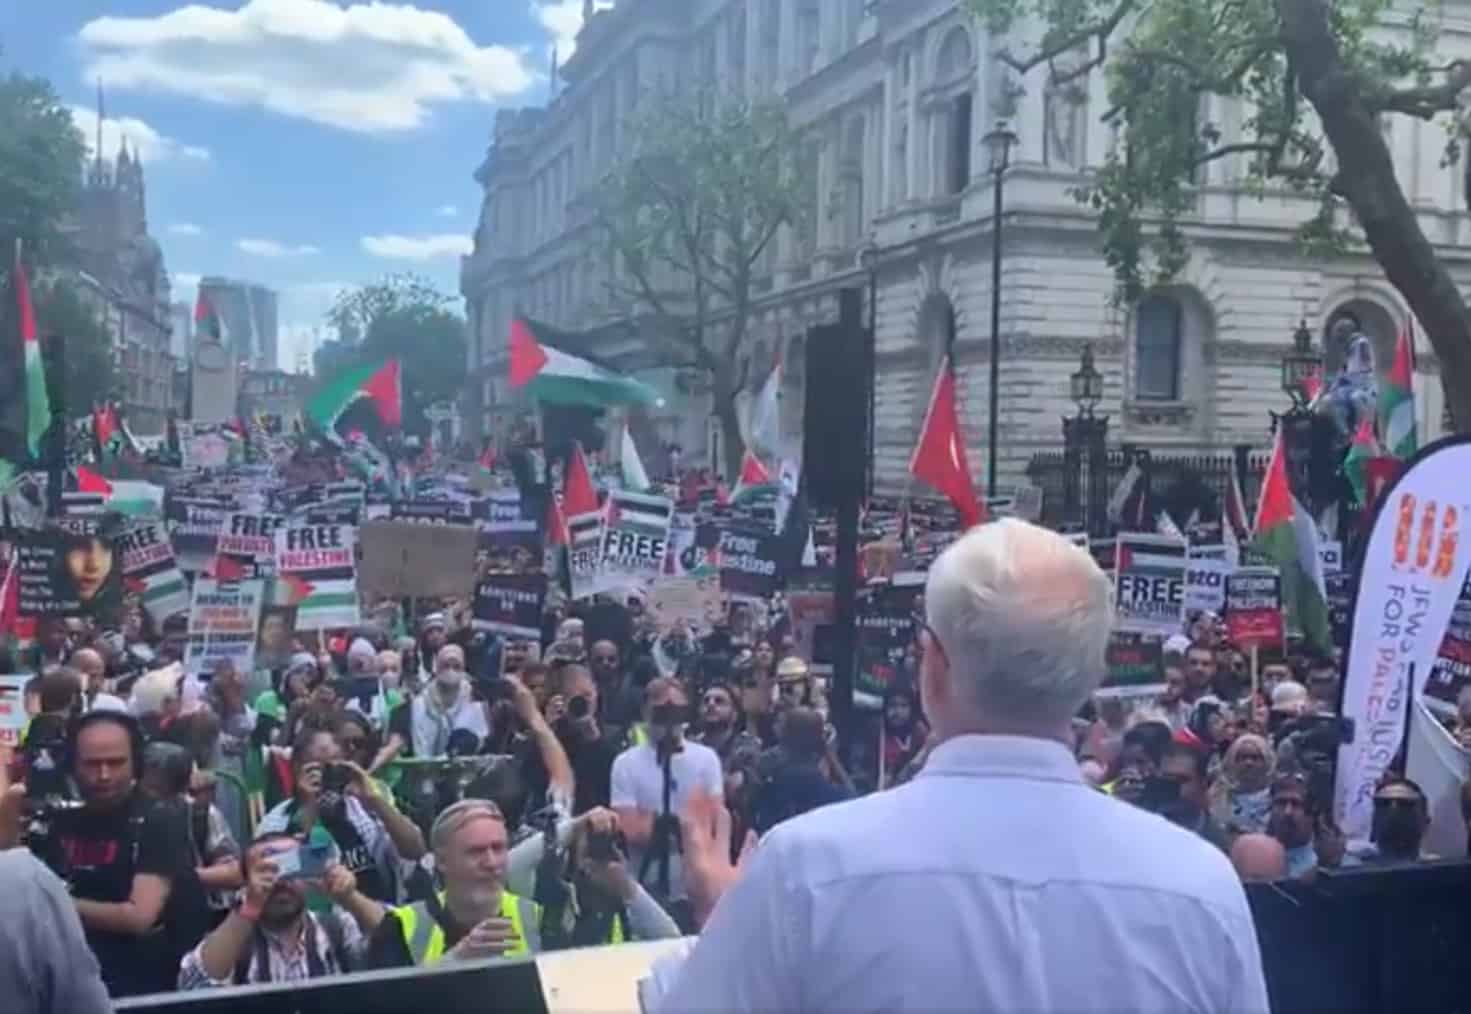 Jeremy Corbyn calls for a halt to arms sales as he addresses pro-Palestine rally